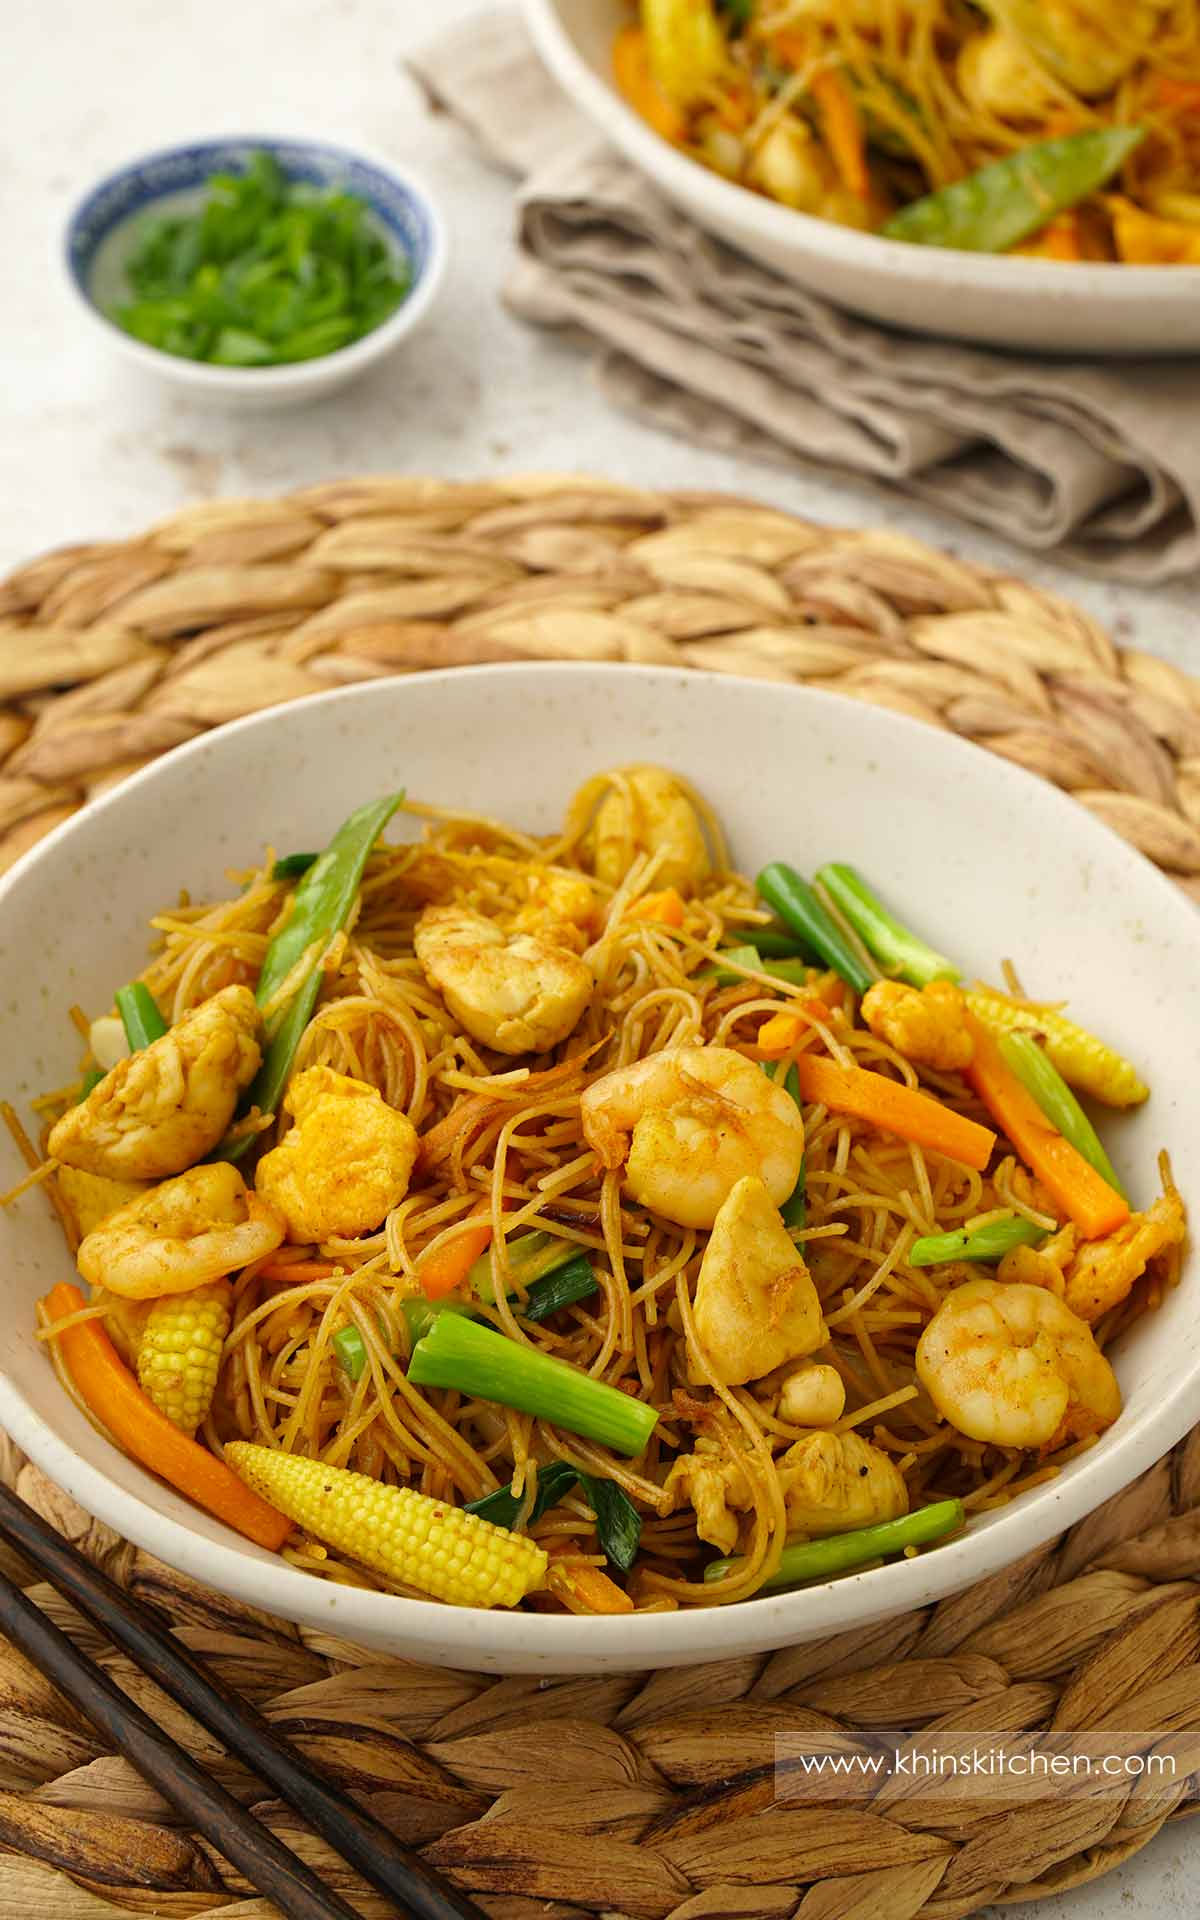 How To Make Singapore Noodles Like Chinese Takeaway?